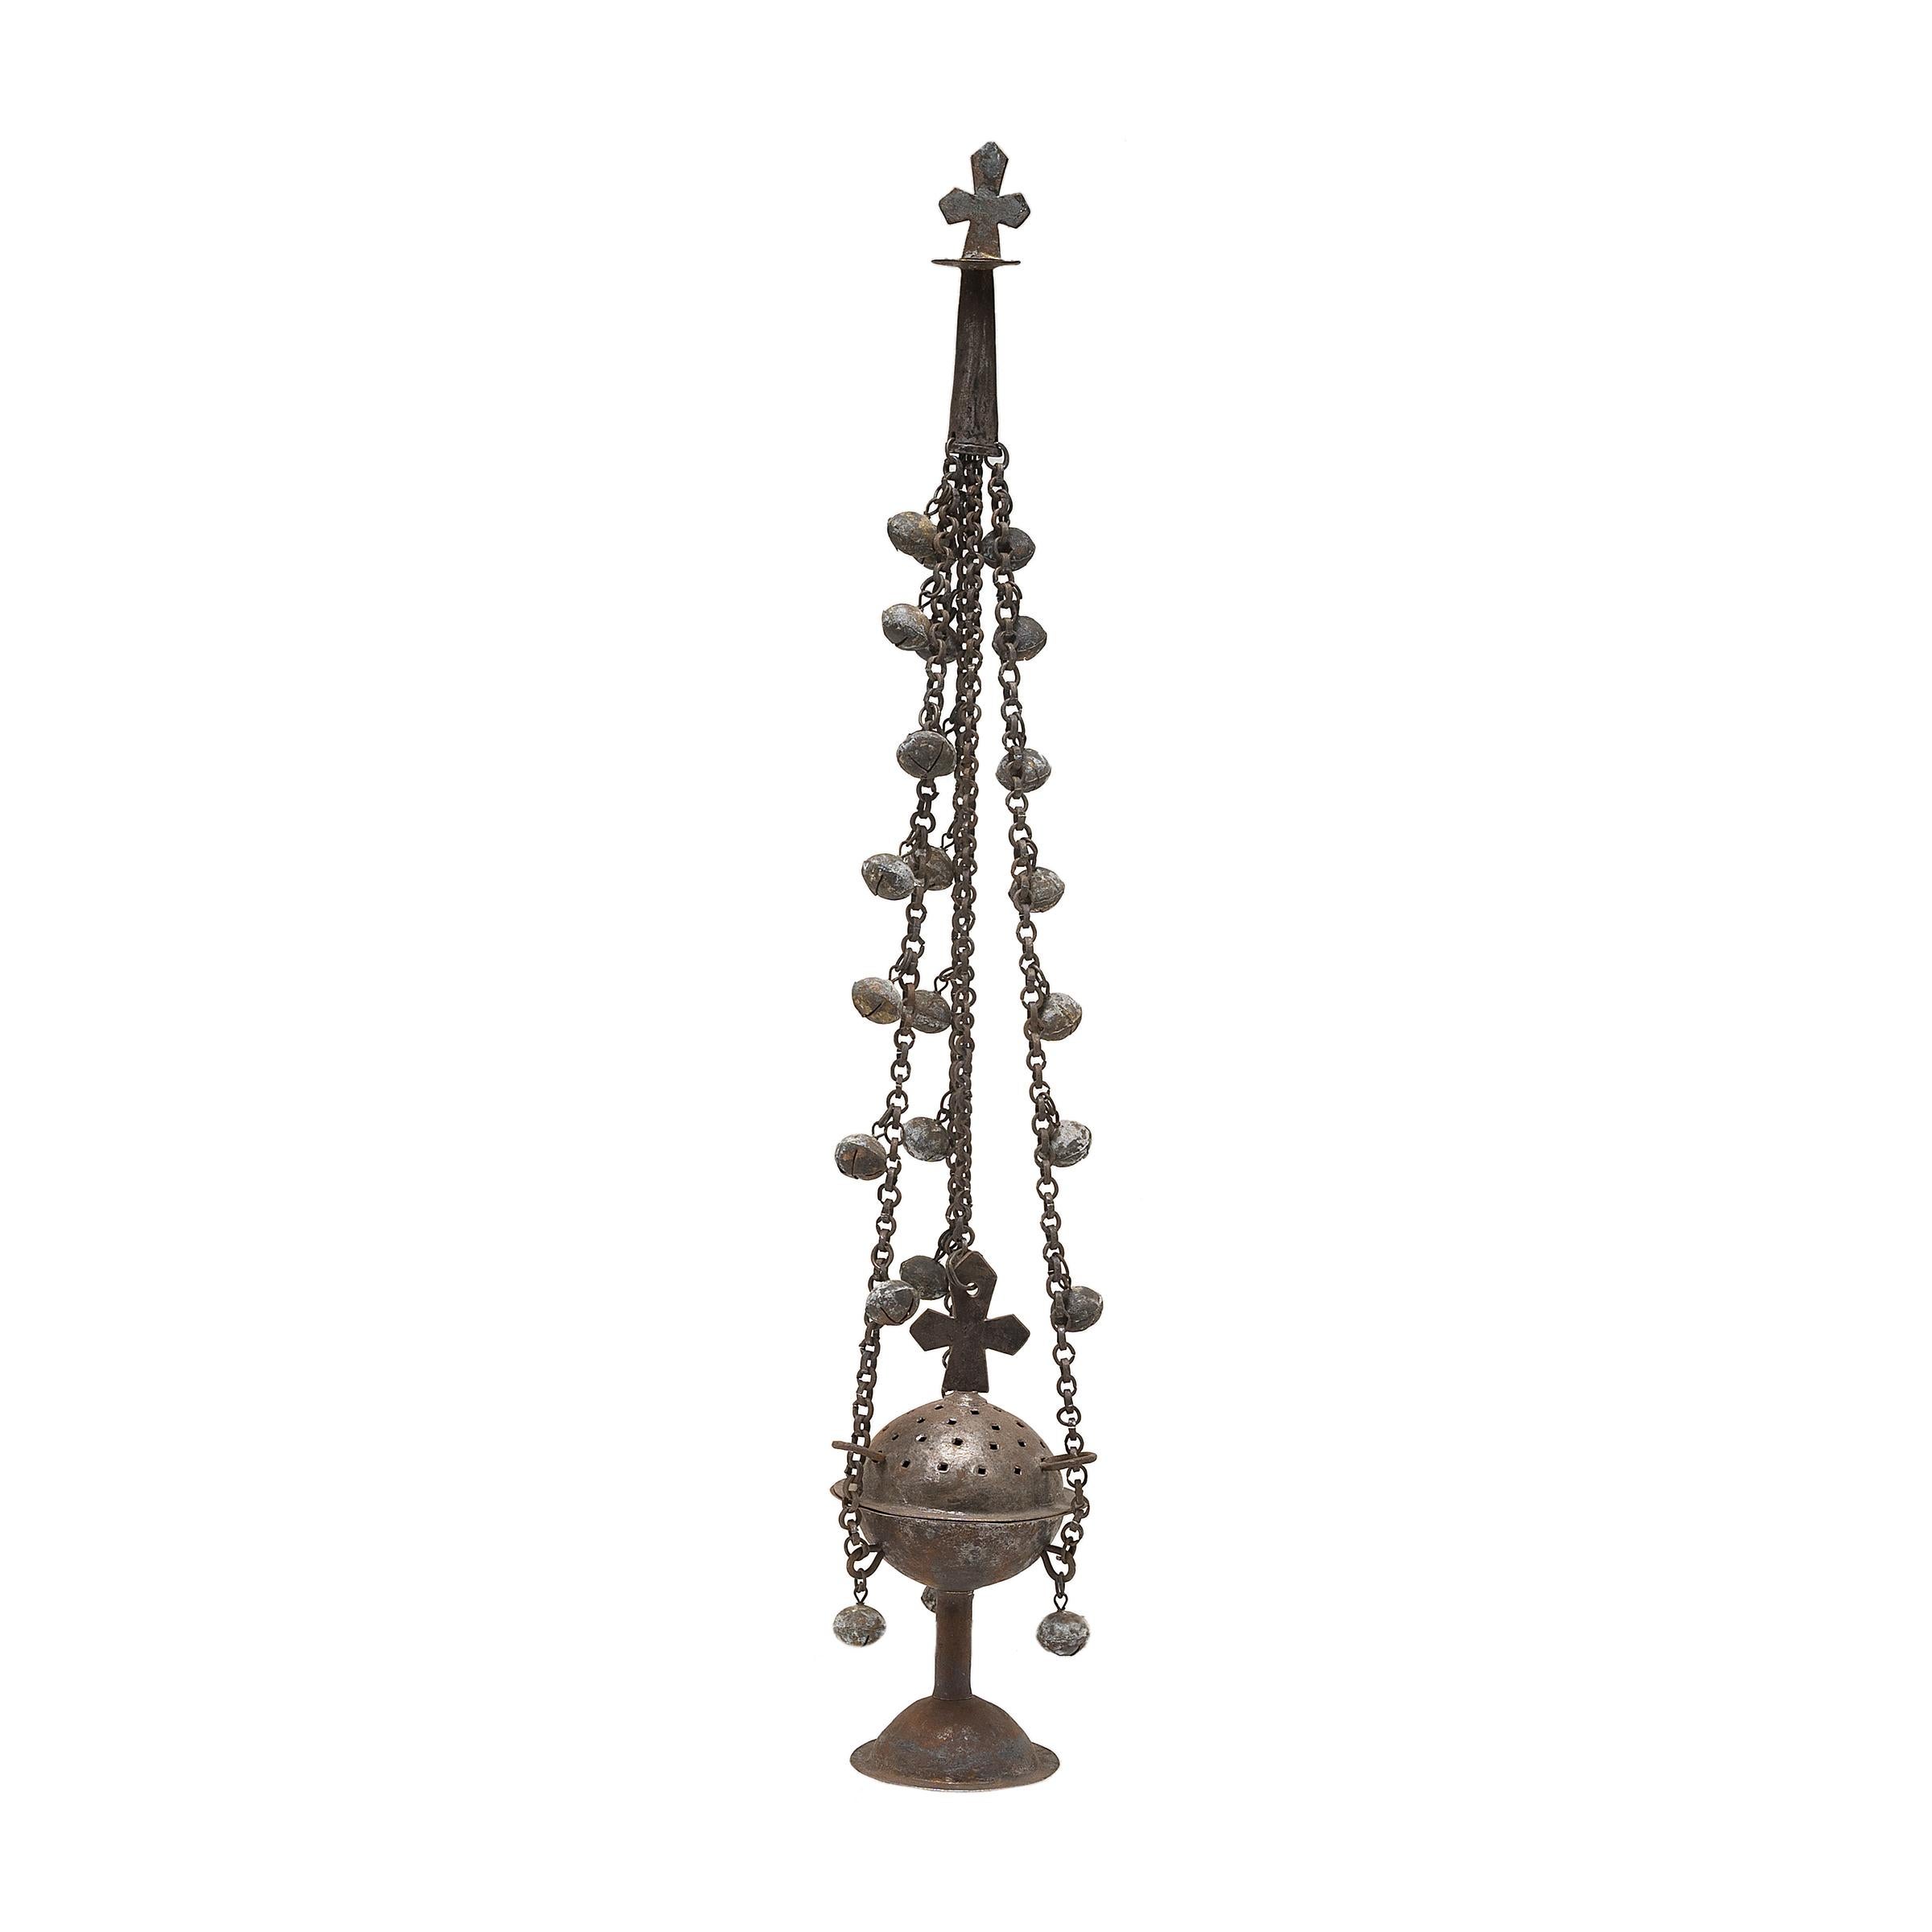 This sculptural bronze object is a 19th-century liturgical censer, or thurible, used for guided prayer and ritual ceremony within the Coptic Orthodox Church. Blessed by the Priest prior to use, the censer was lit with incense such as frankincense,